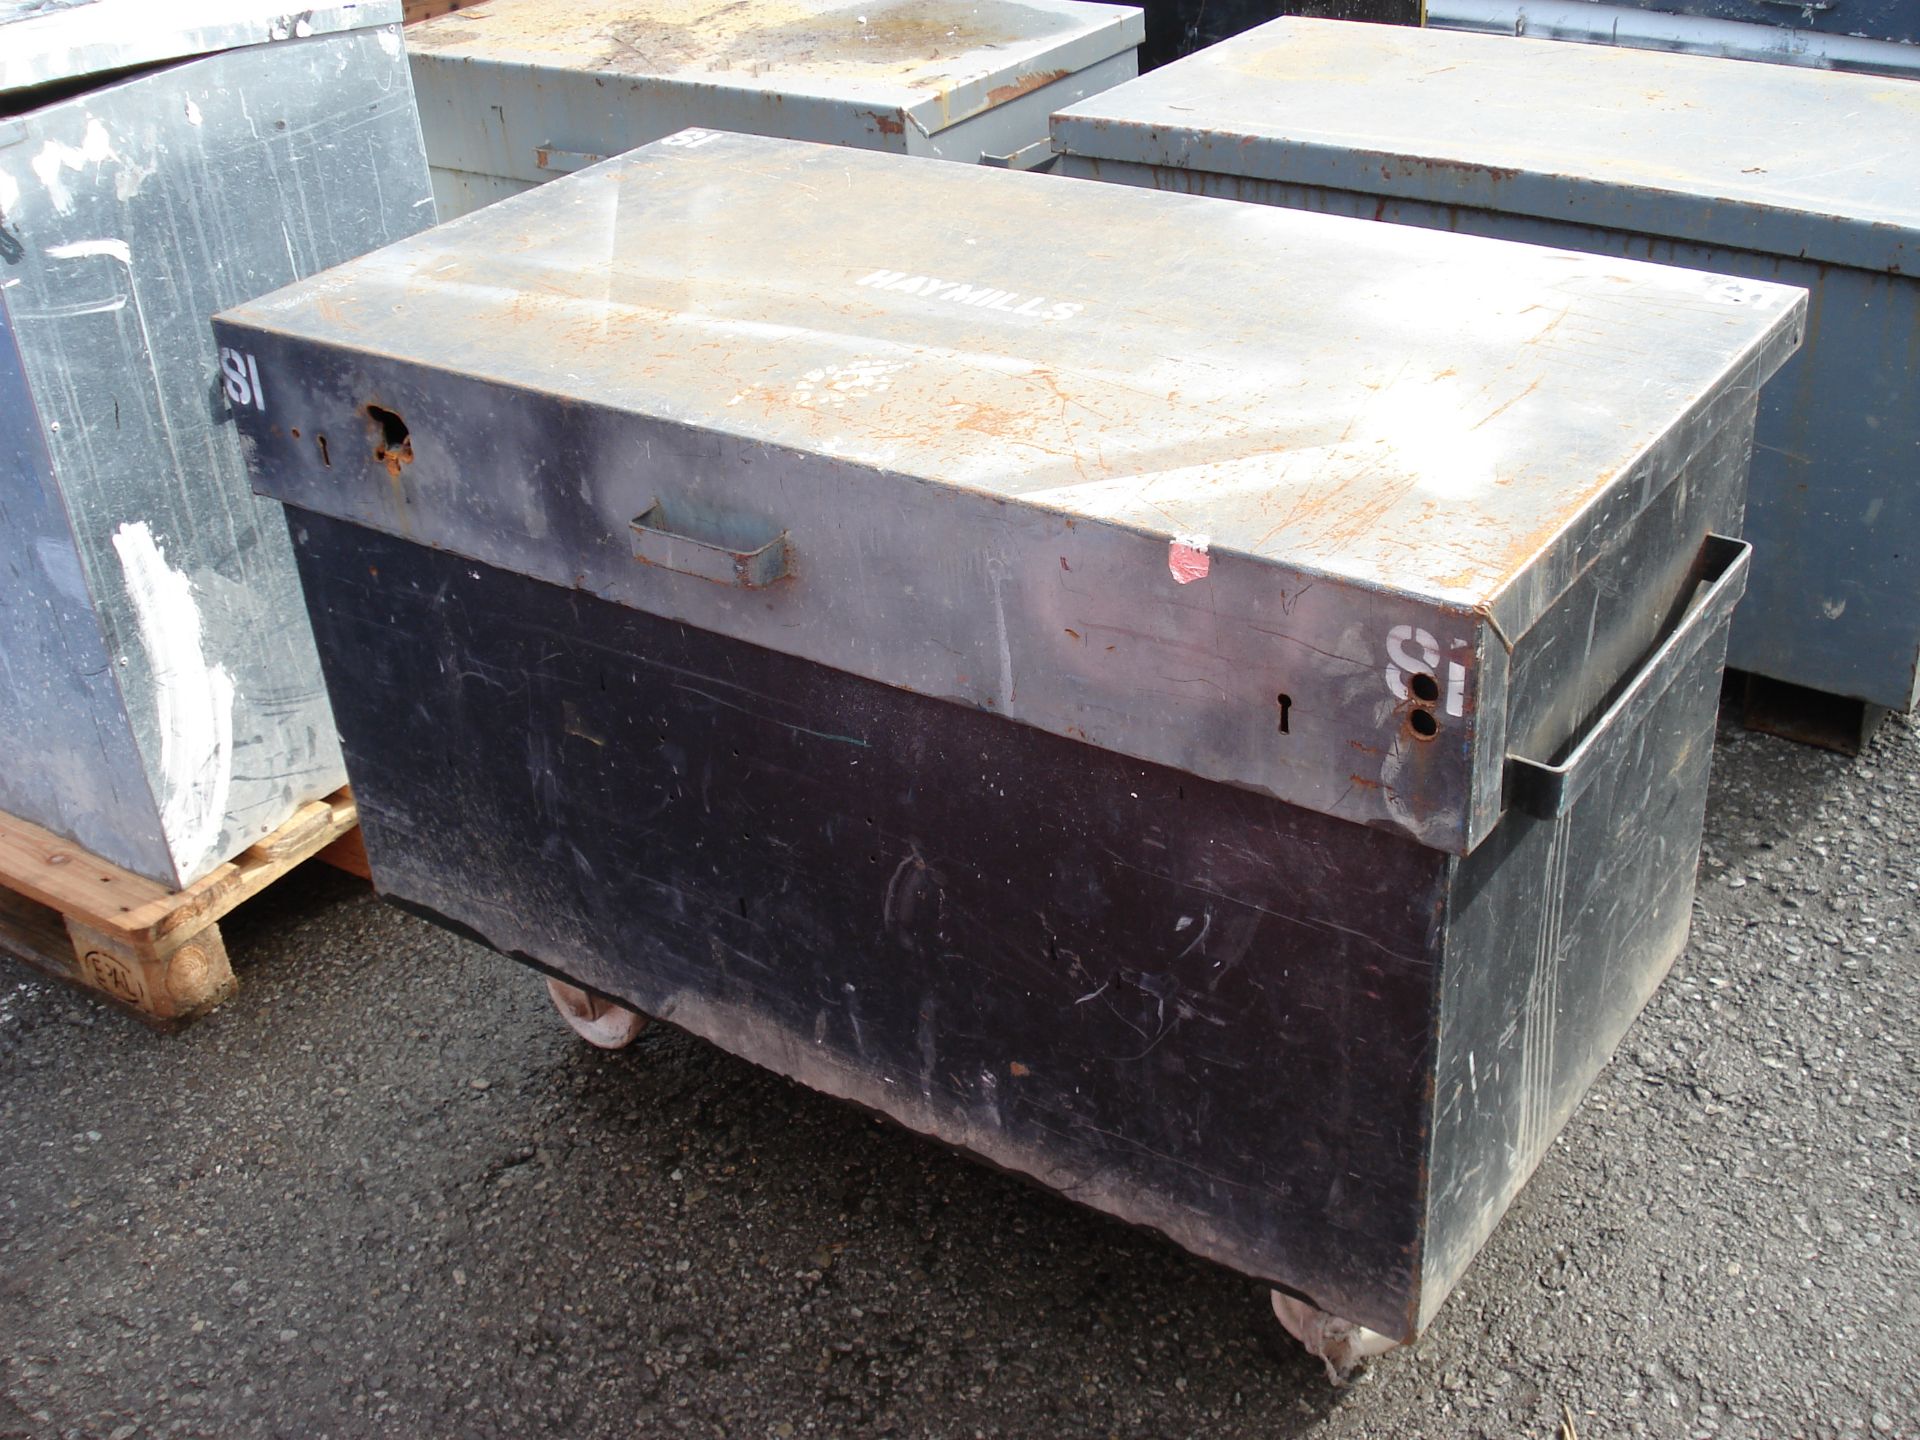 BLACK METAL STORAGE BOX ON WHEELS CONTAINING YELLOW WEIGHTS